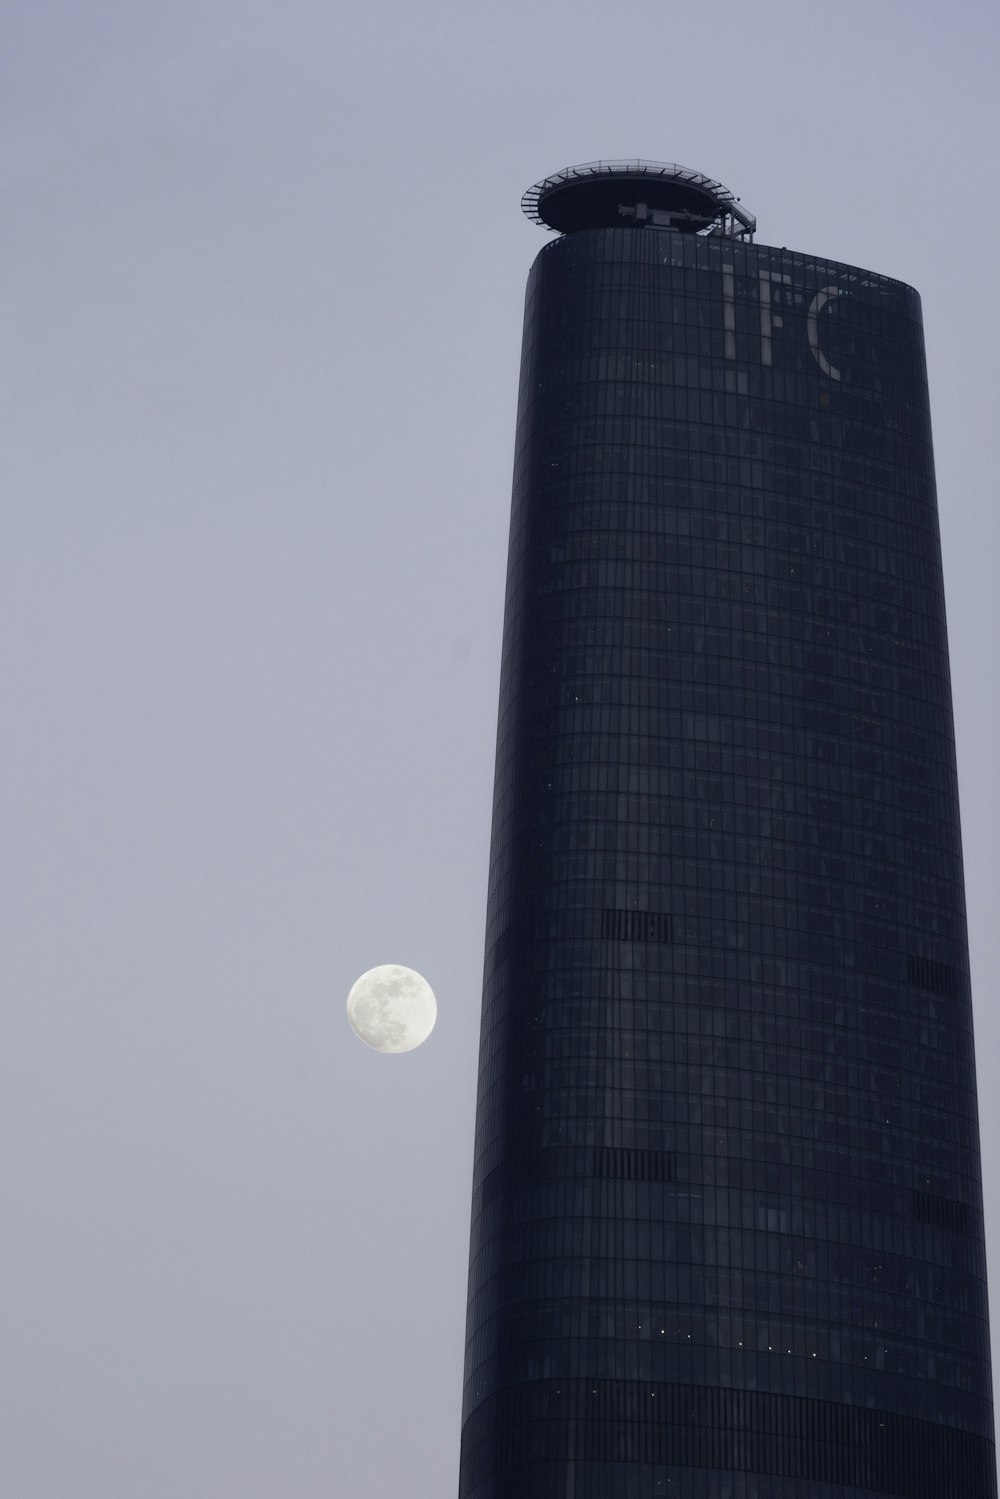 a very tall building with a very large moon in the sky